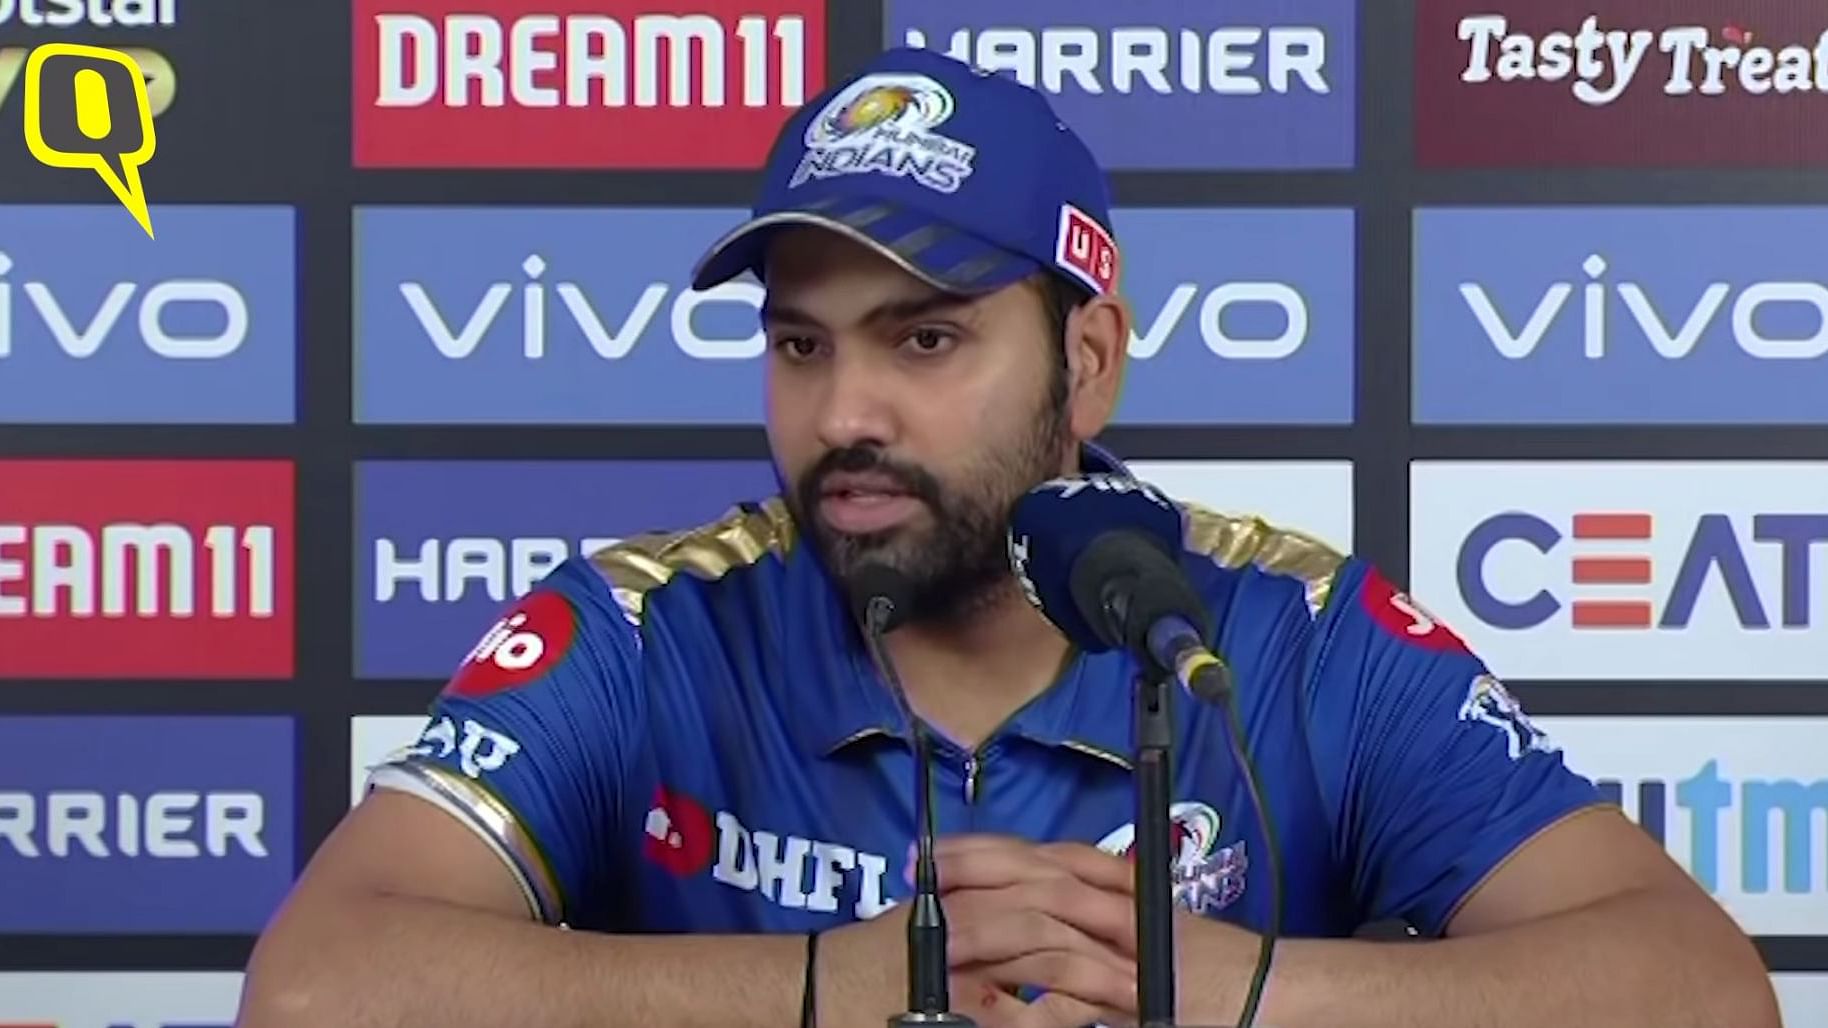 Mumbai Indians skipper Rohit Sharma speaks to the media after the Super Over victory over Sunrisers Hyderabad.